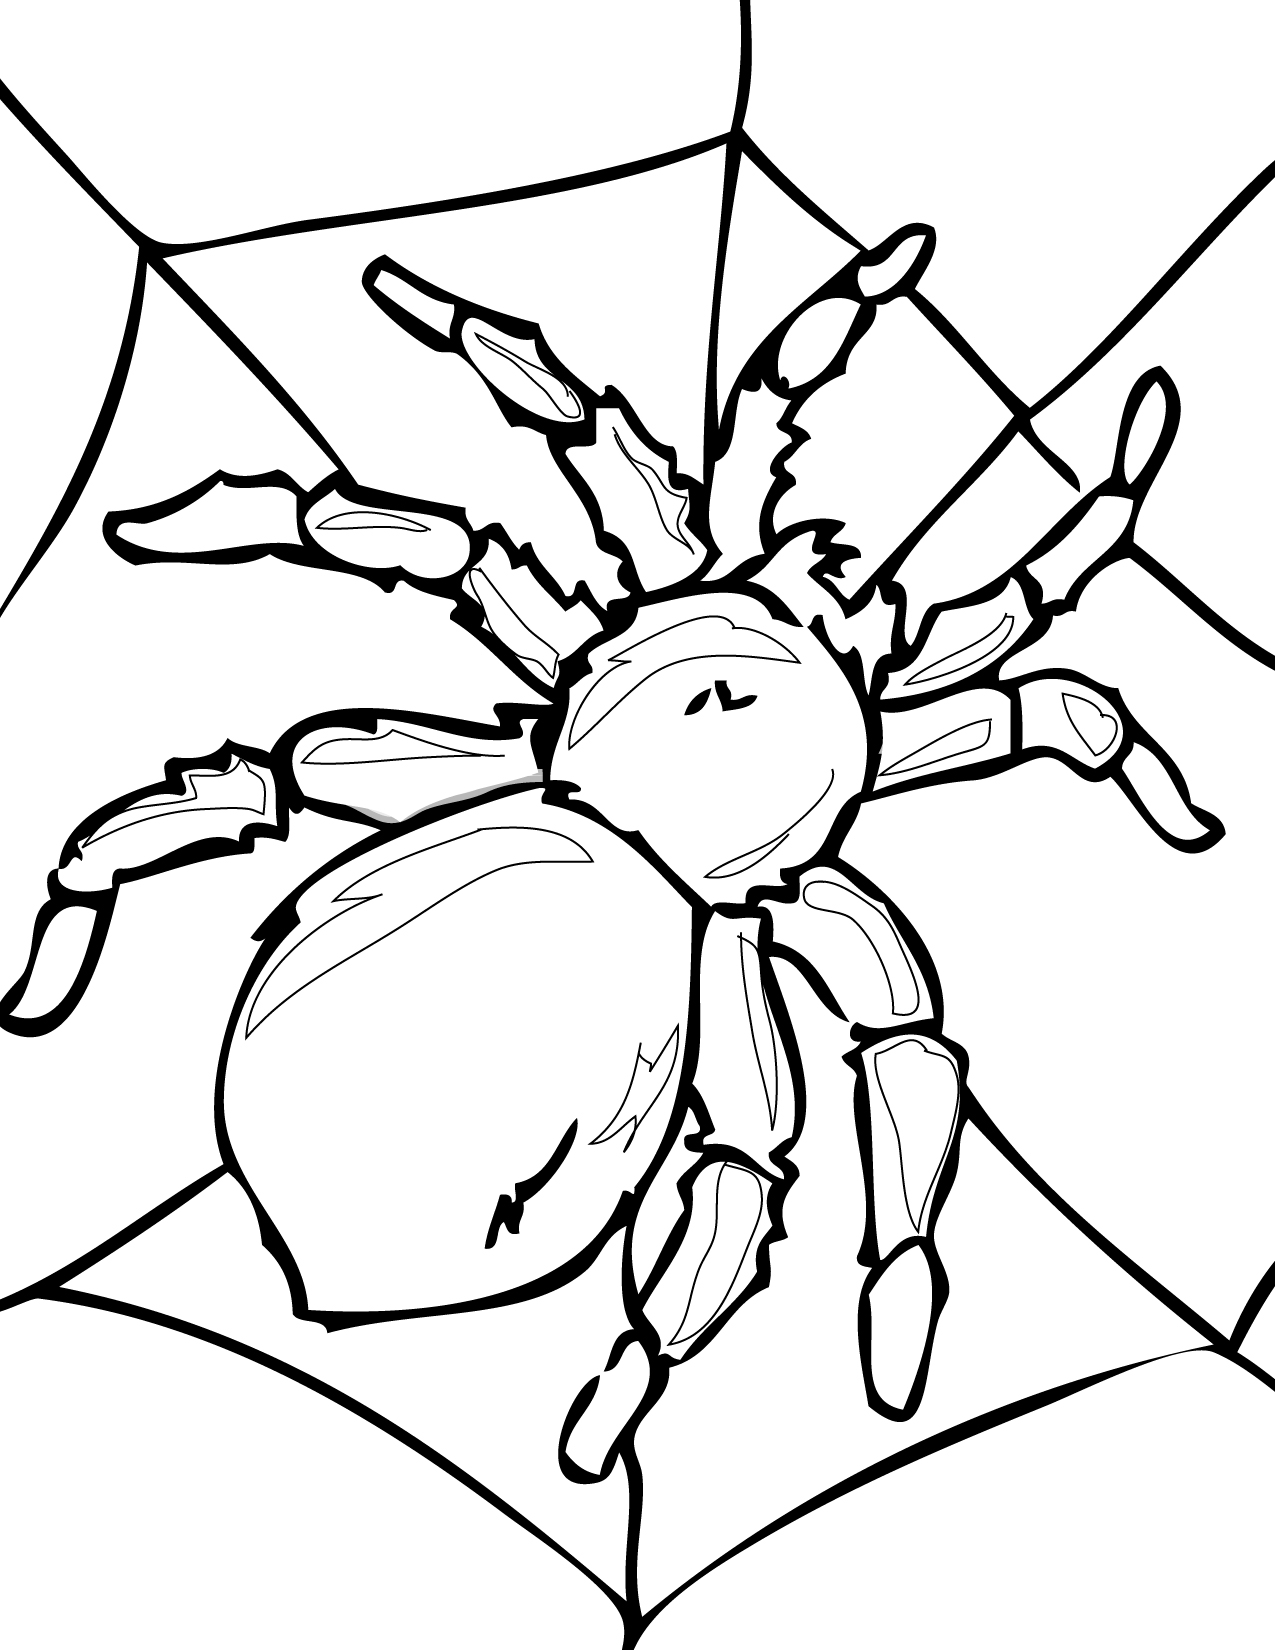 Coloring page: Spider (Animals) #595 - Free Printable Coloring Pages